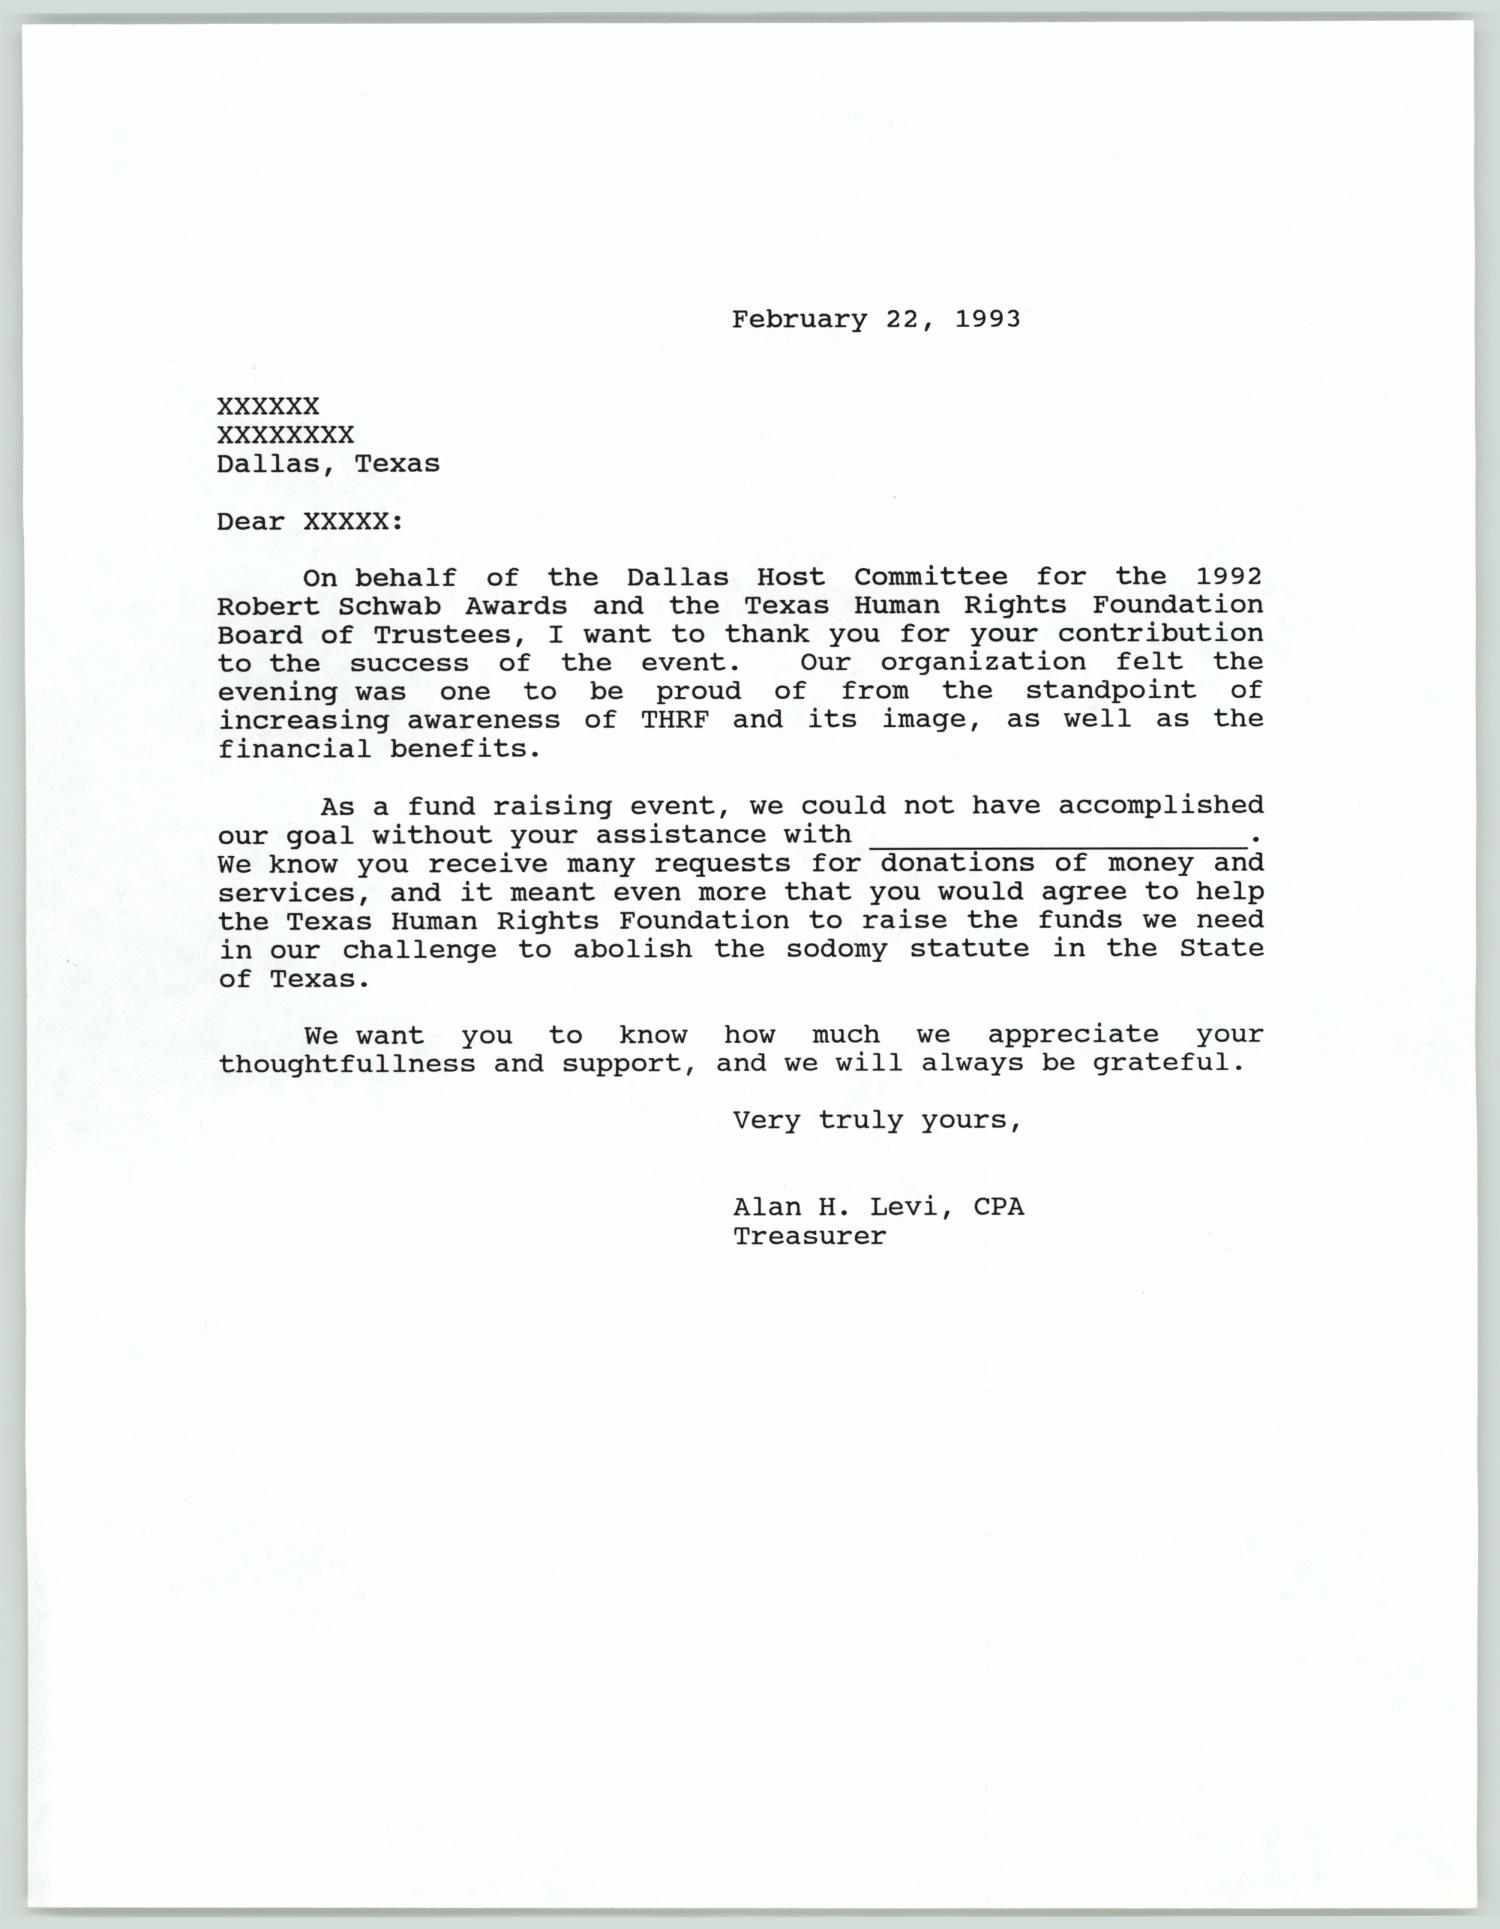 Letter template for donations to the Texas Human Rights Foundation] - UNT  Digital Library